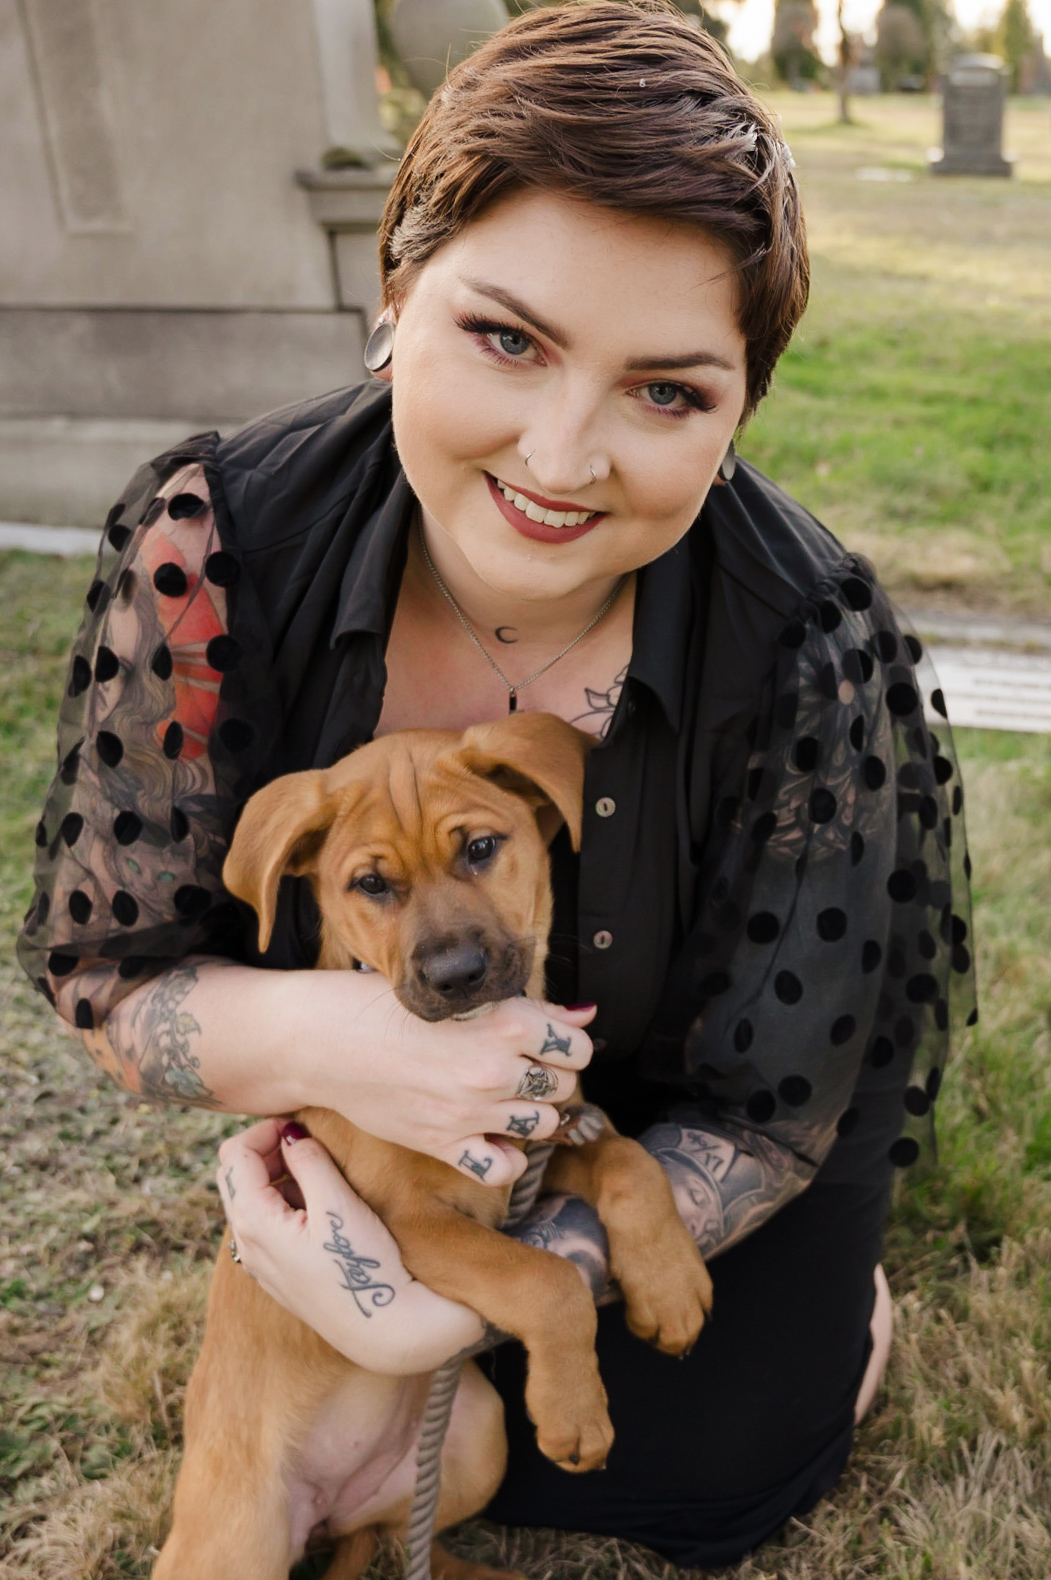 engagement photo of bride-to-be playing with puppy in a cemetery